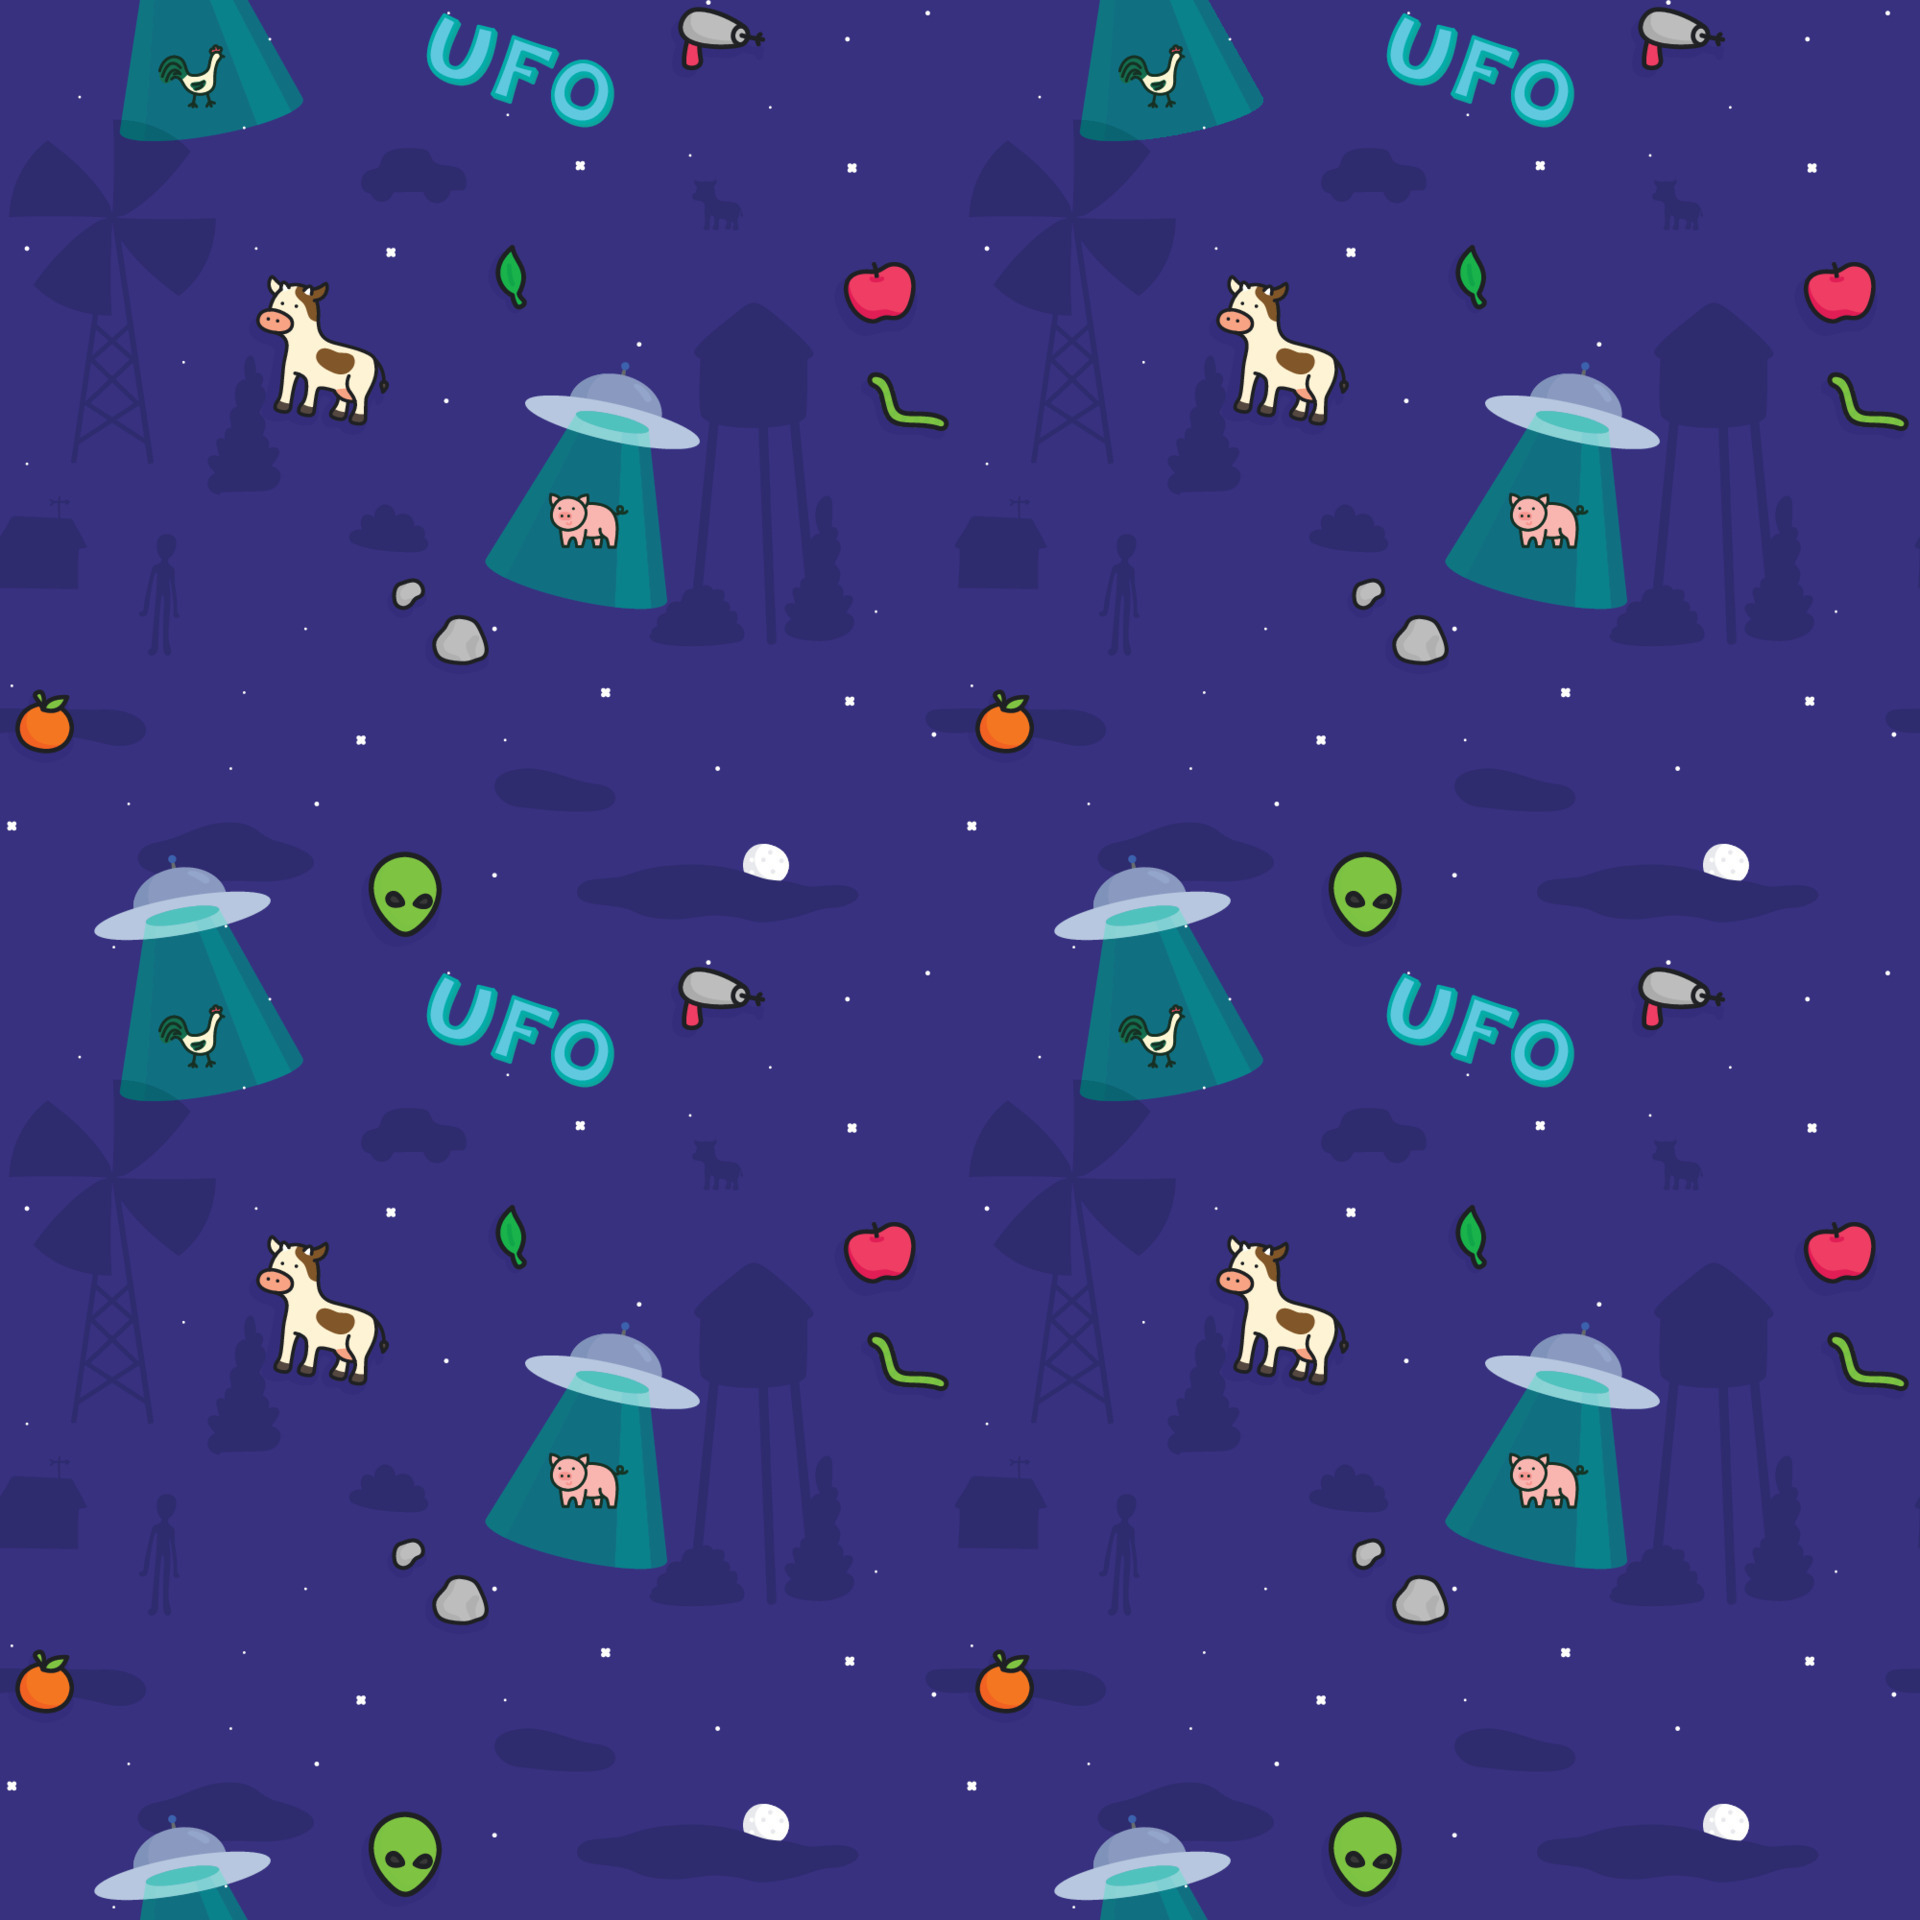 1920x1920 UFO aliens invade farmhouse at night seamless pattern Gift Wrap background wallpaper 11006546 Vector Art